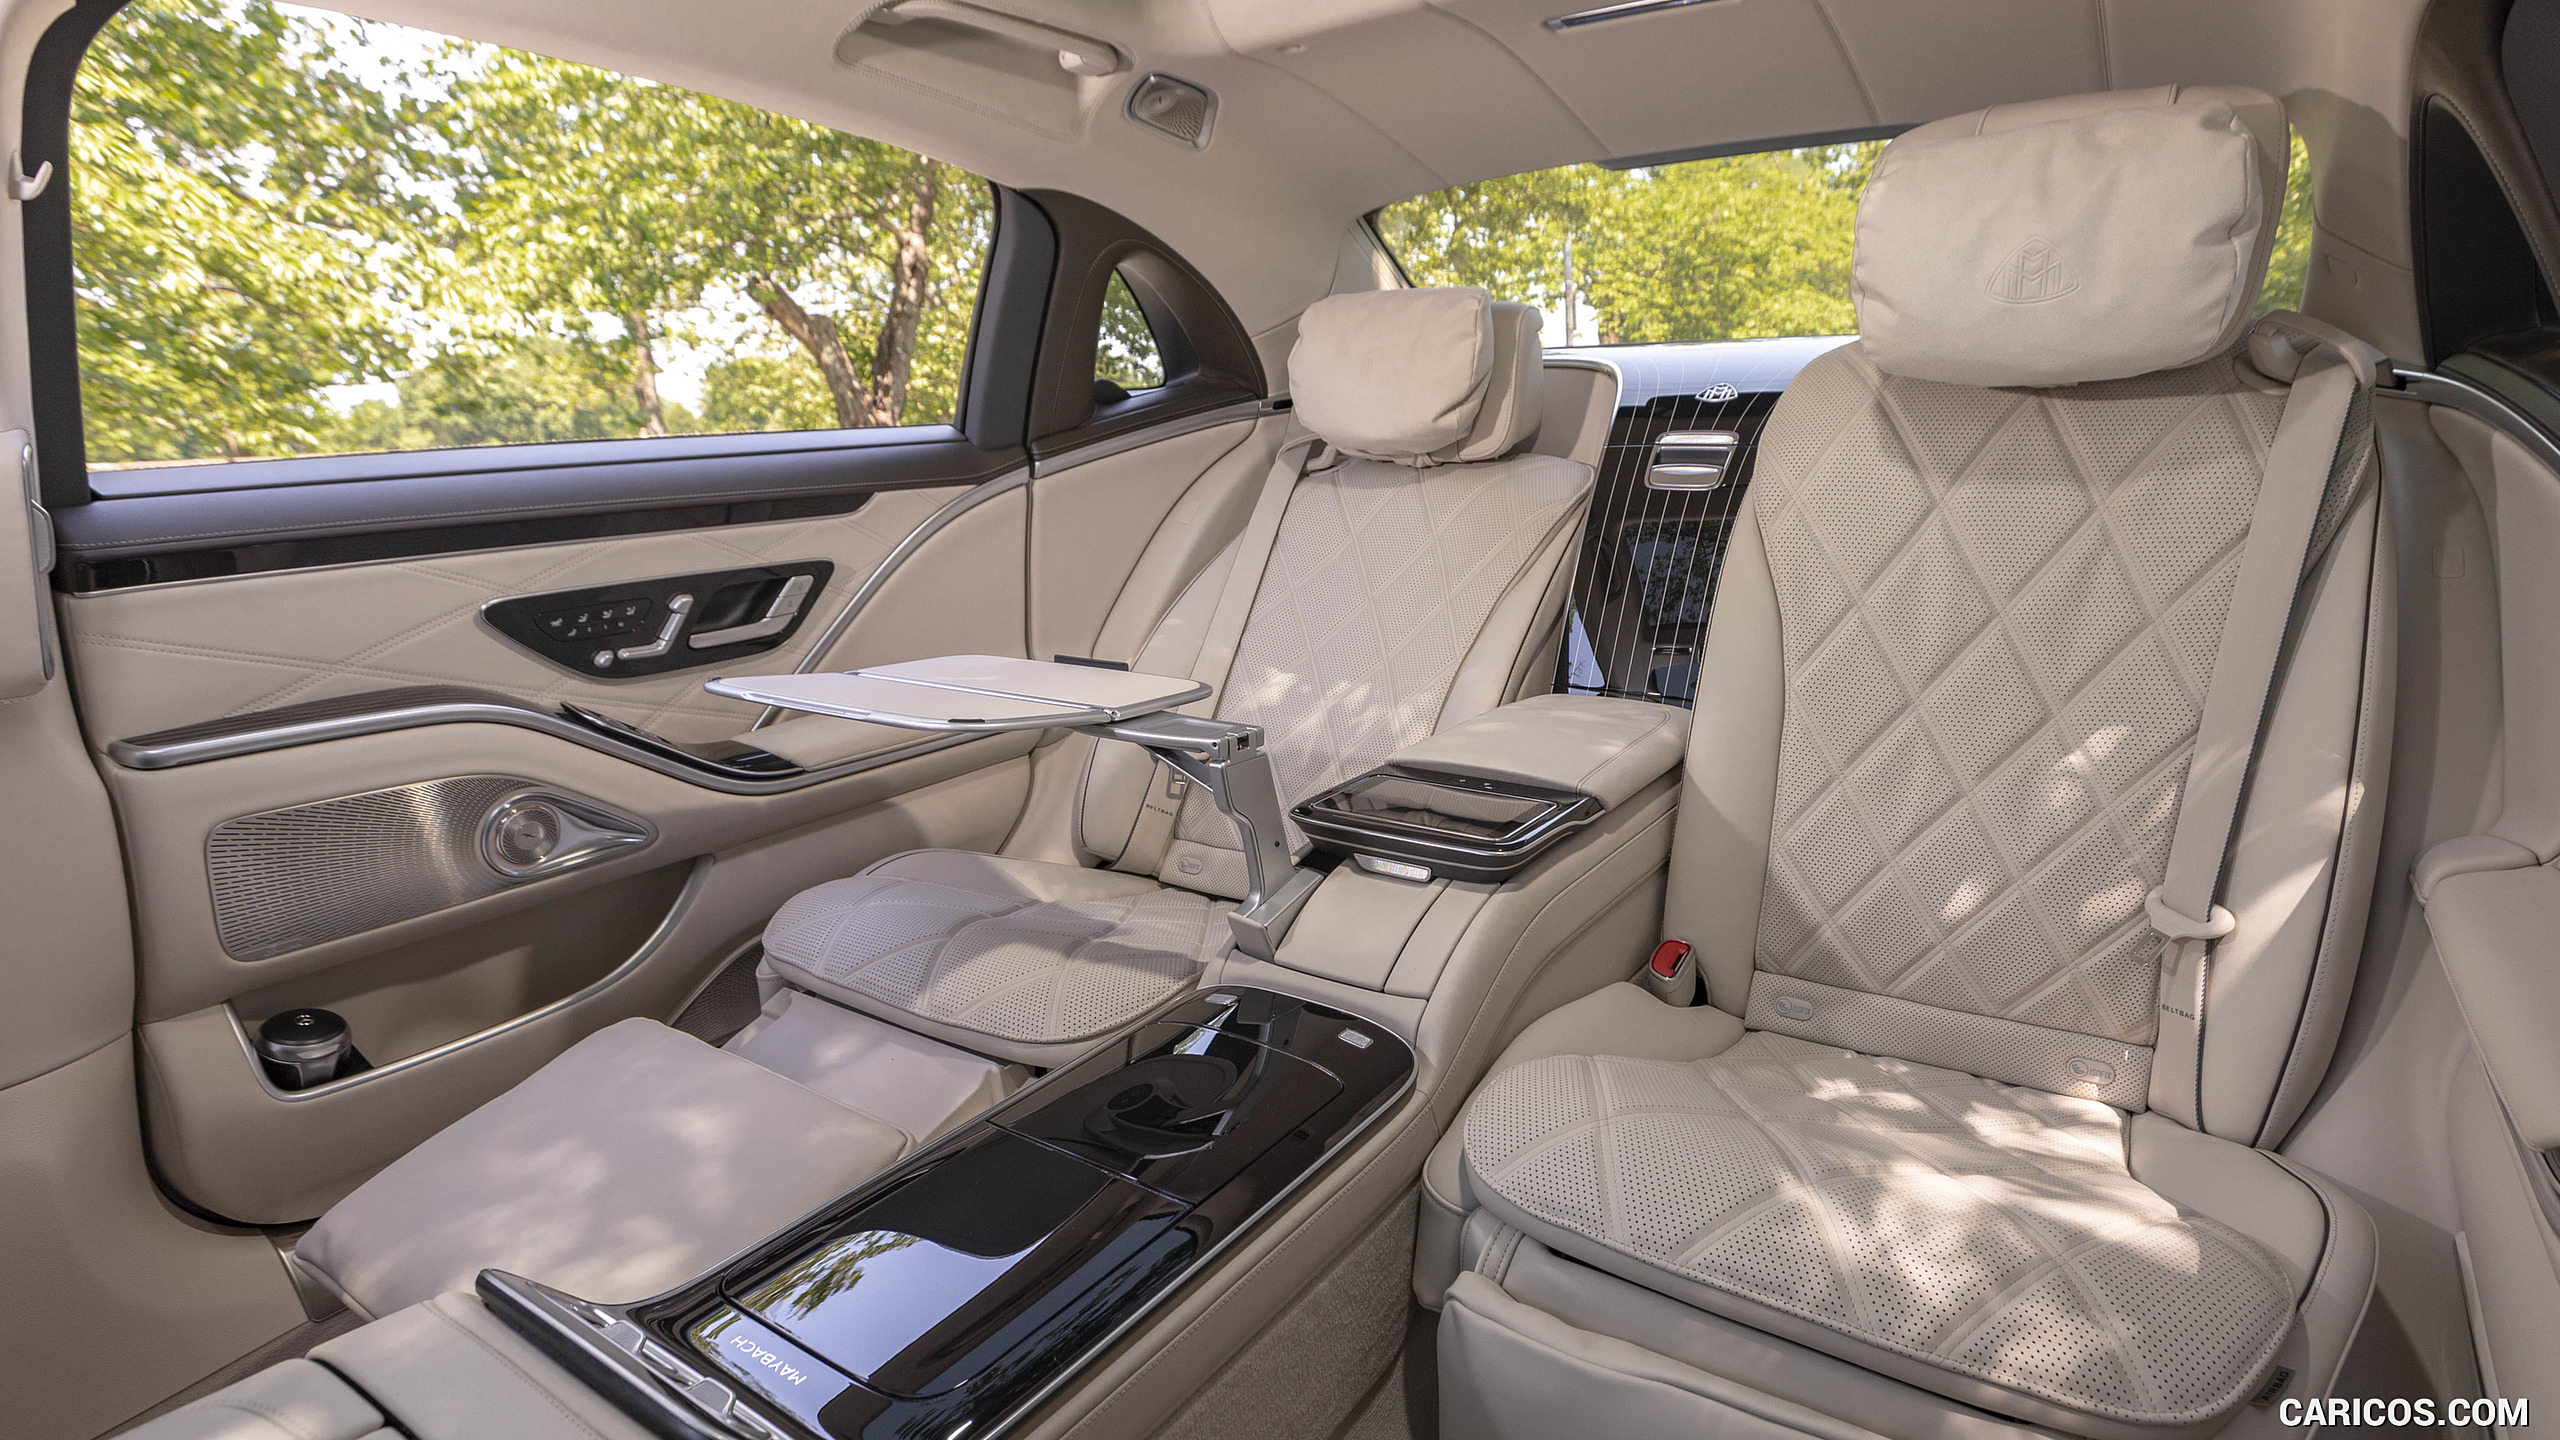 2022 Mercedes-Maybach S 680 4MATIC (US-Spec) - Interior, Rear Seats, #82 of 173